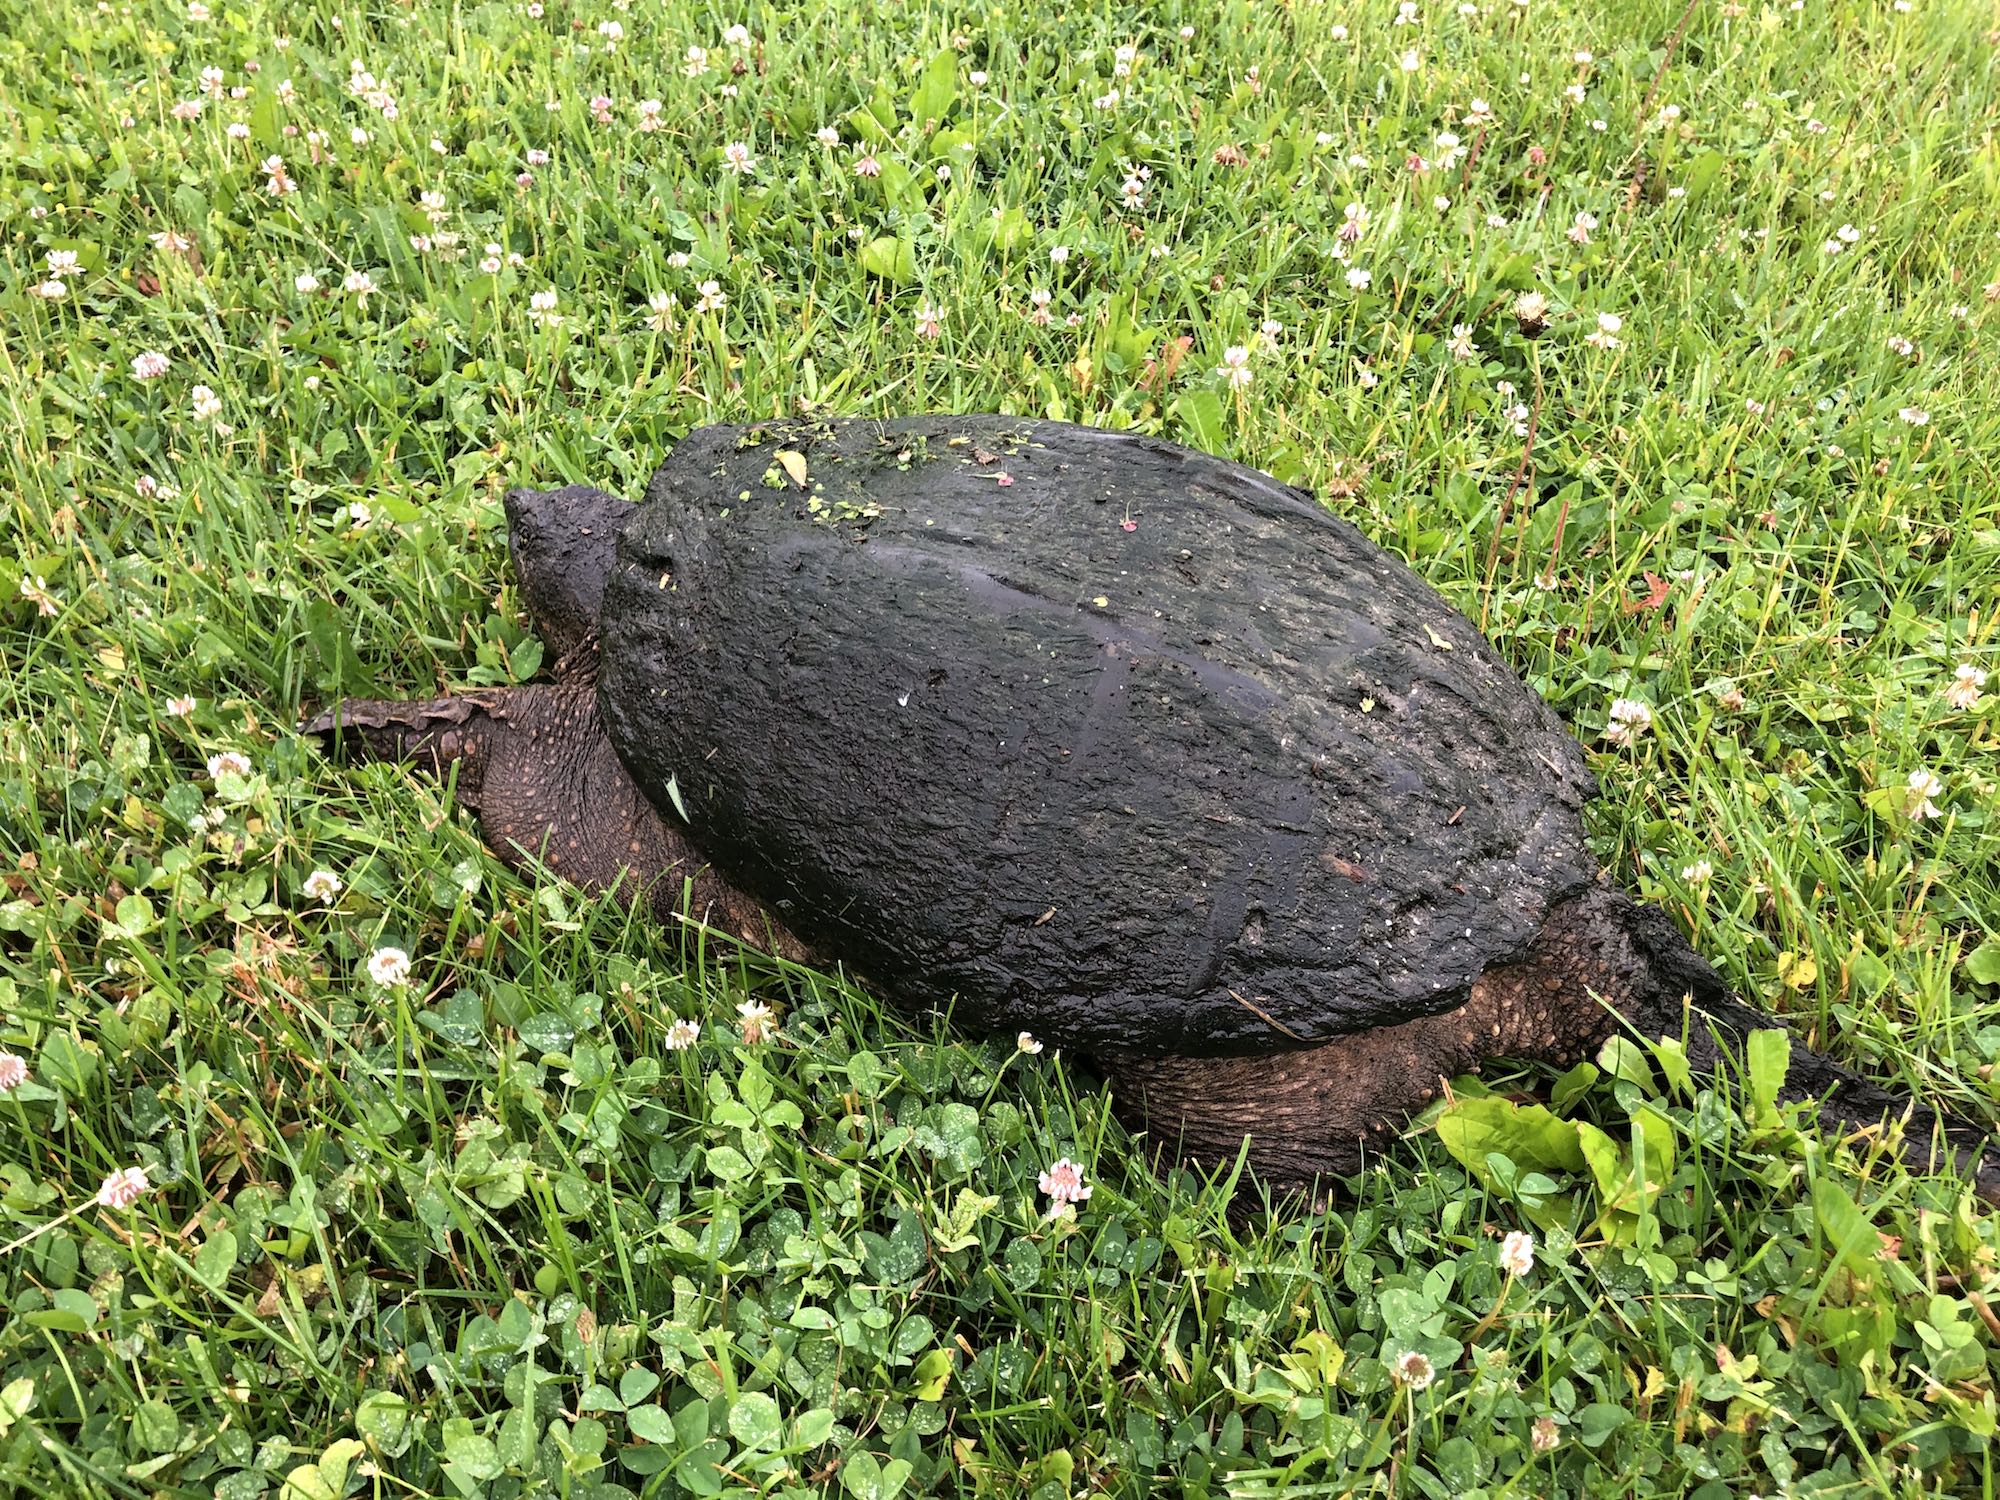 Snapping Turtle in E. Ray Stevens Pond and Aquatic Gardens on corner of Manitou Way and Nakoma Road in Madison, Wisconsin on June 16, 2019.